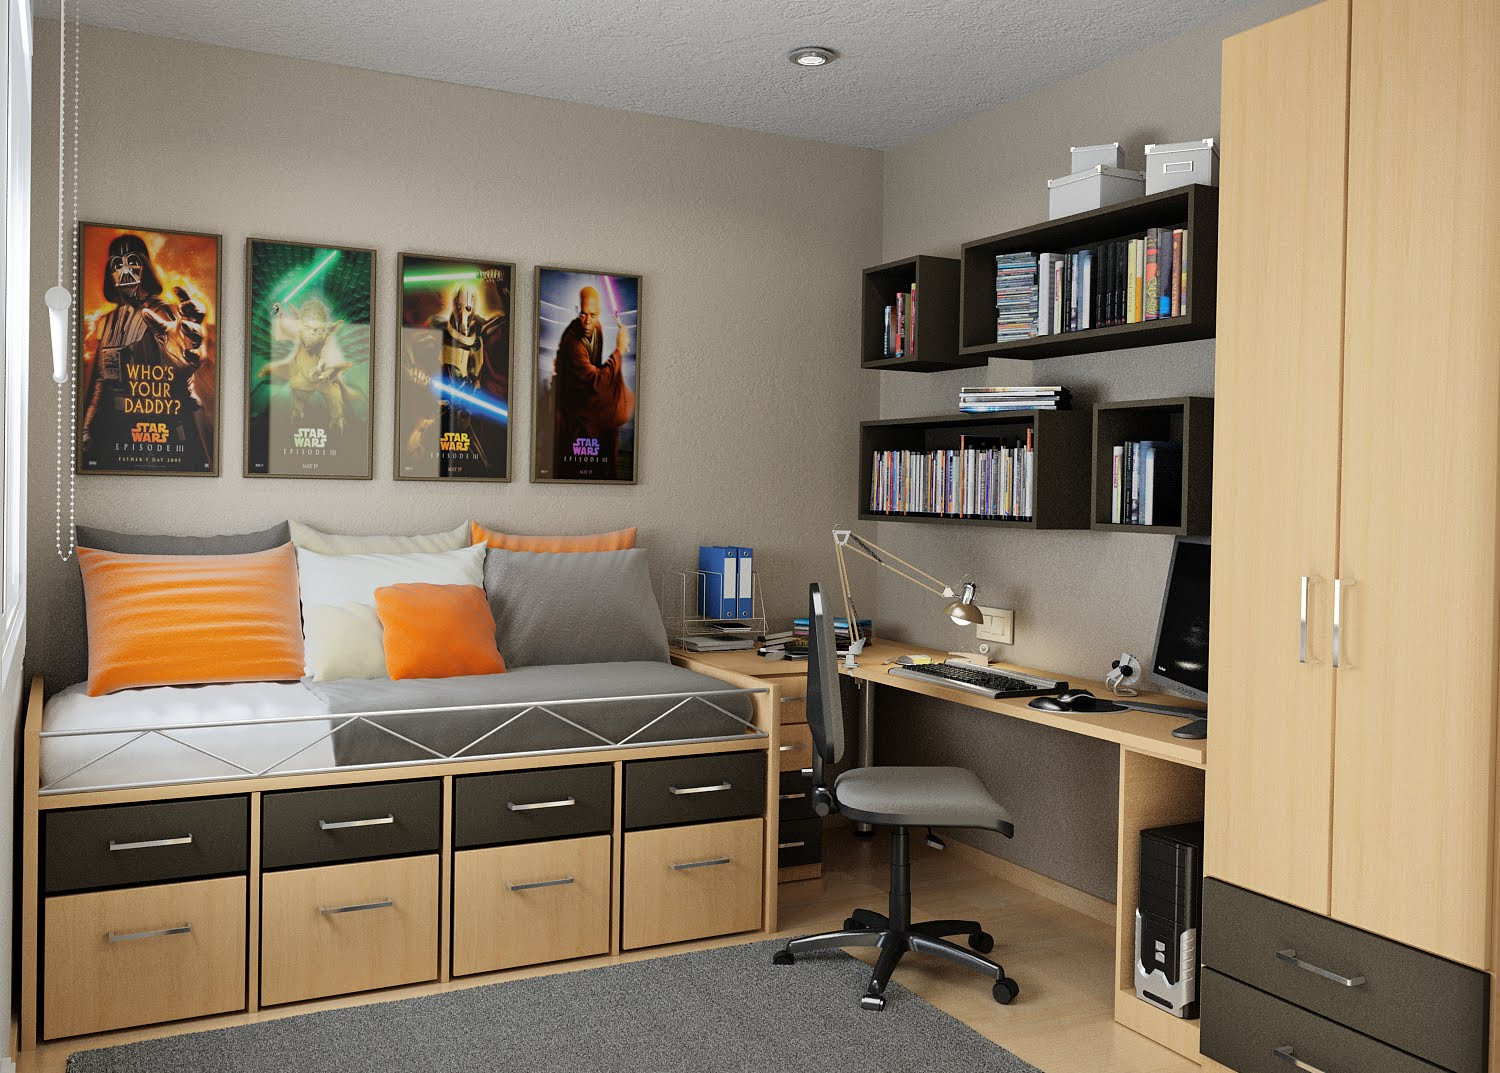 Bedroom Storage Solutions
 Small Bedroom Storage Solutions Designed to Save up Space